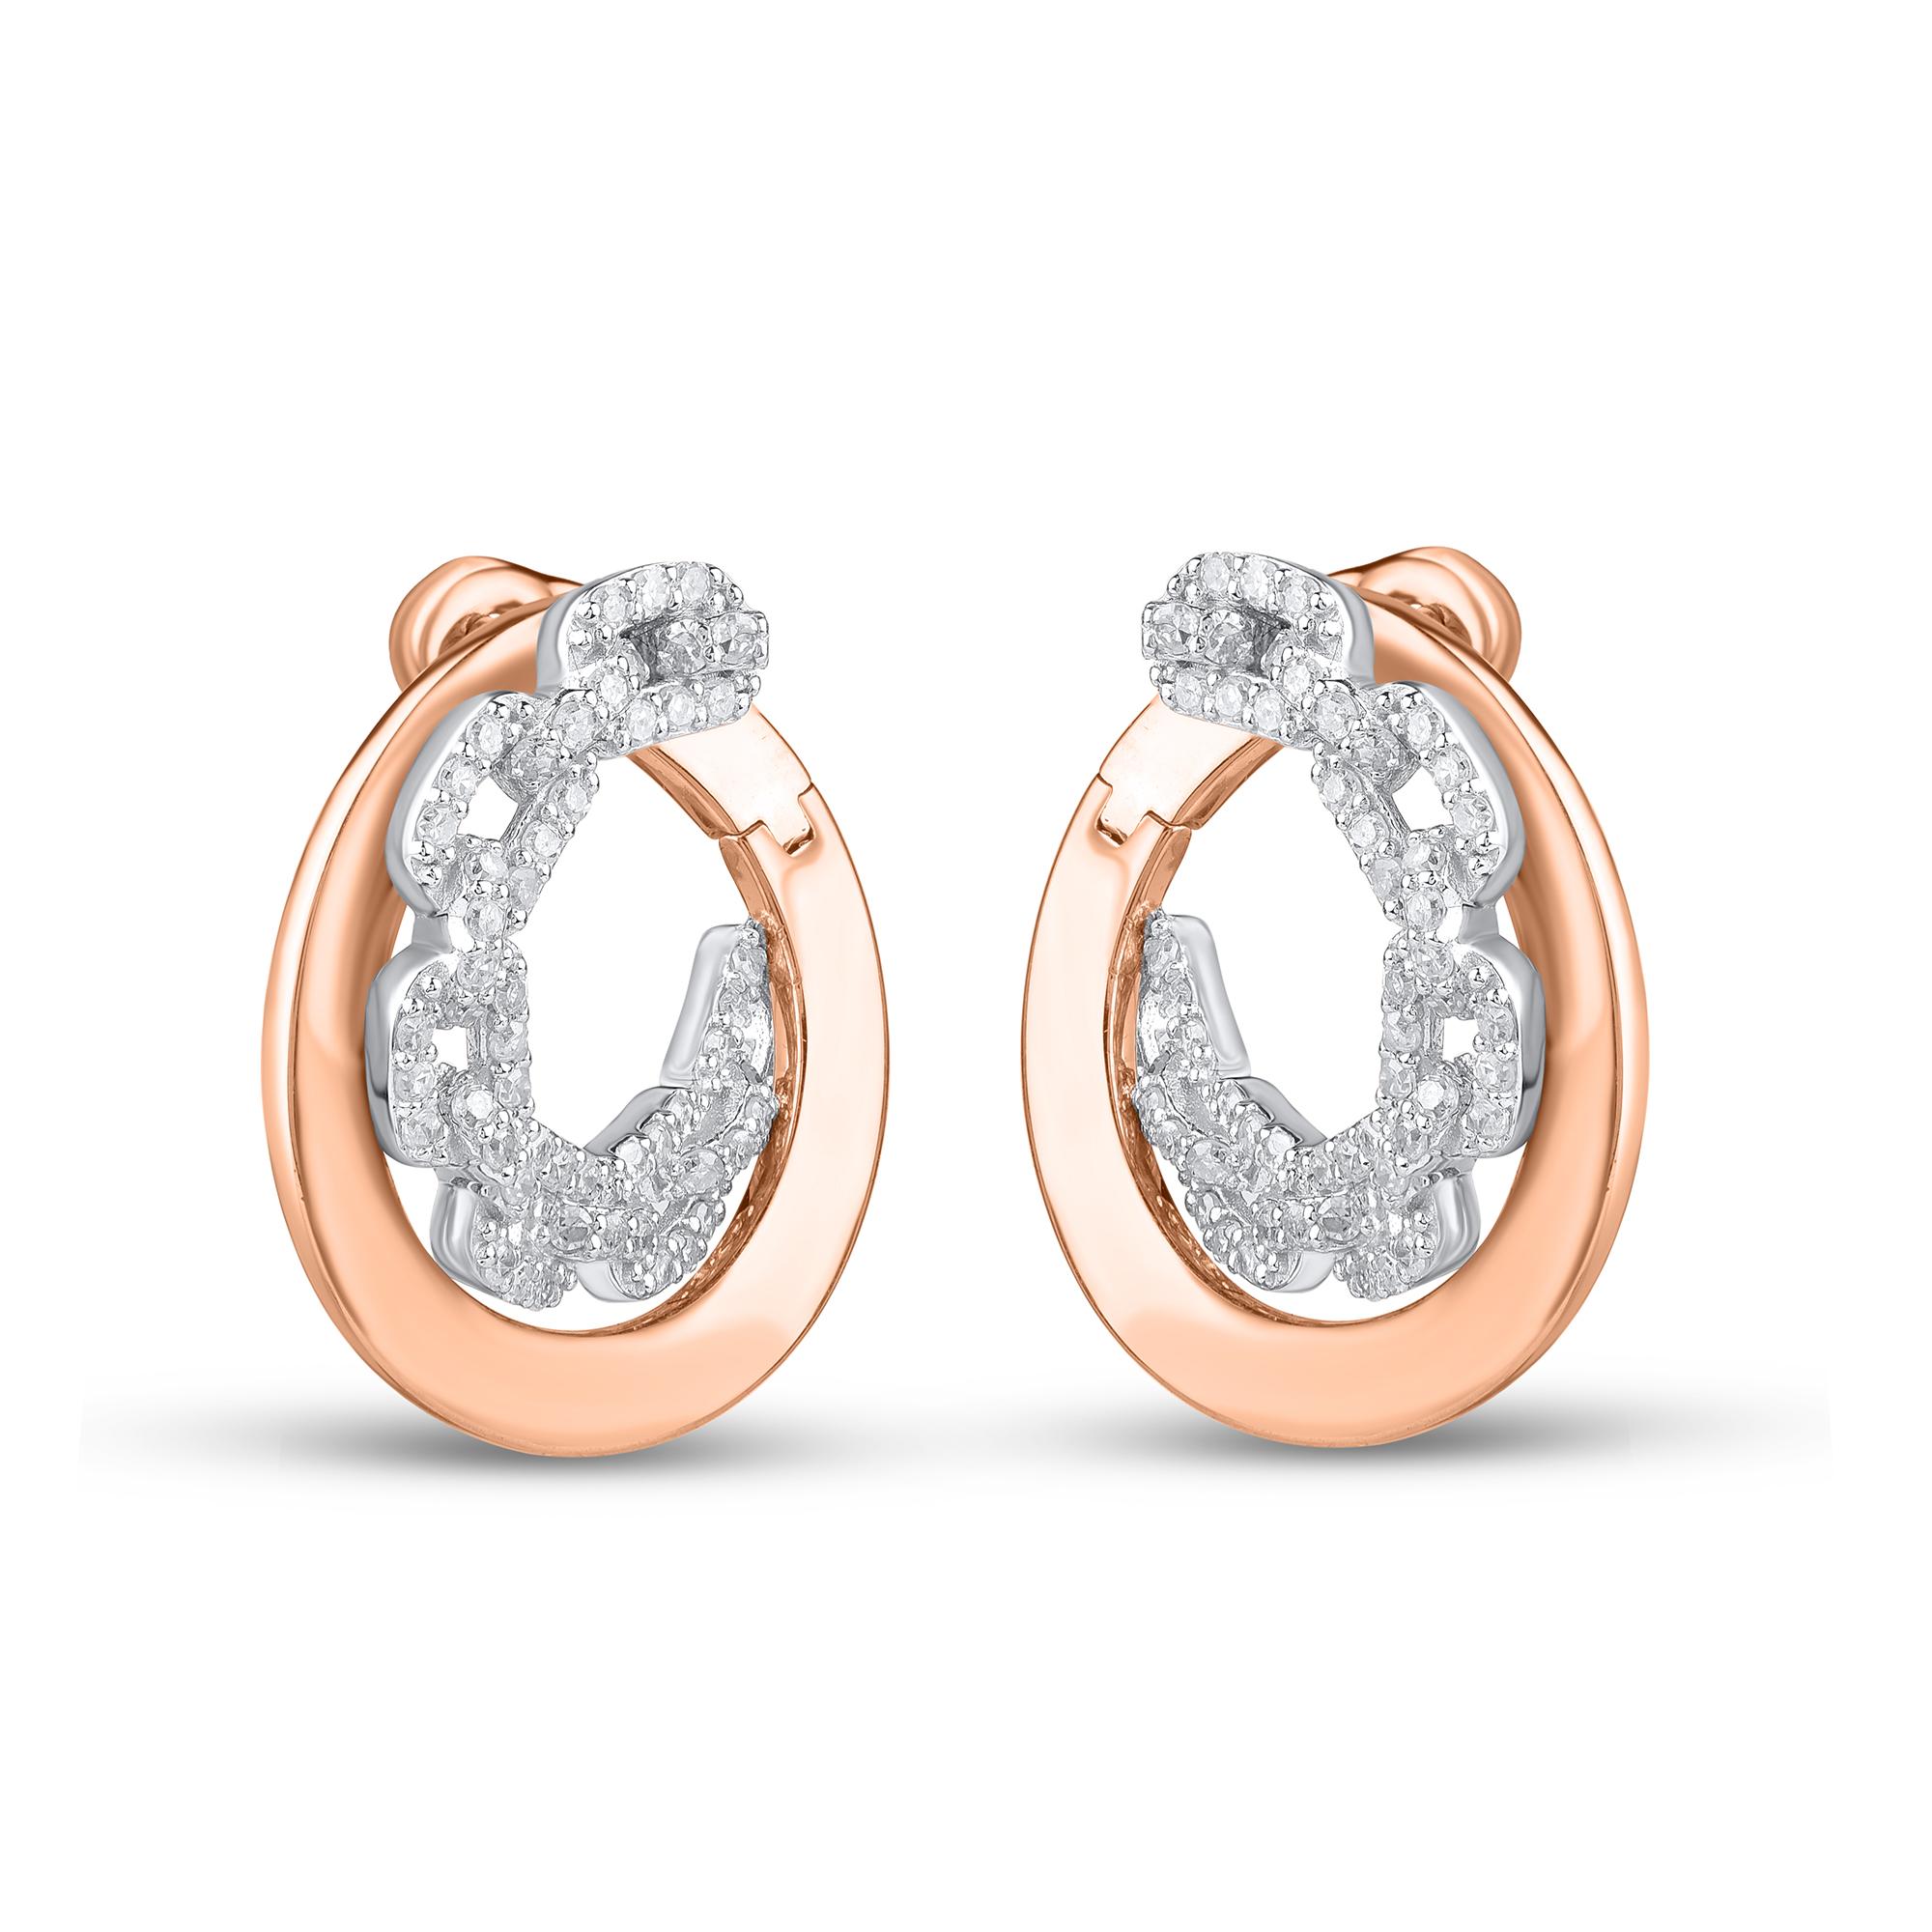 These diamond hoop earrings will accentuate your style. This unique design features 110 round-cut diamonds in prong setting, fashioned in 18 KT white, and rose gold. Diamonds are graded HI color, I1 clarity.   

Gold color can be customized upon